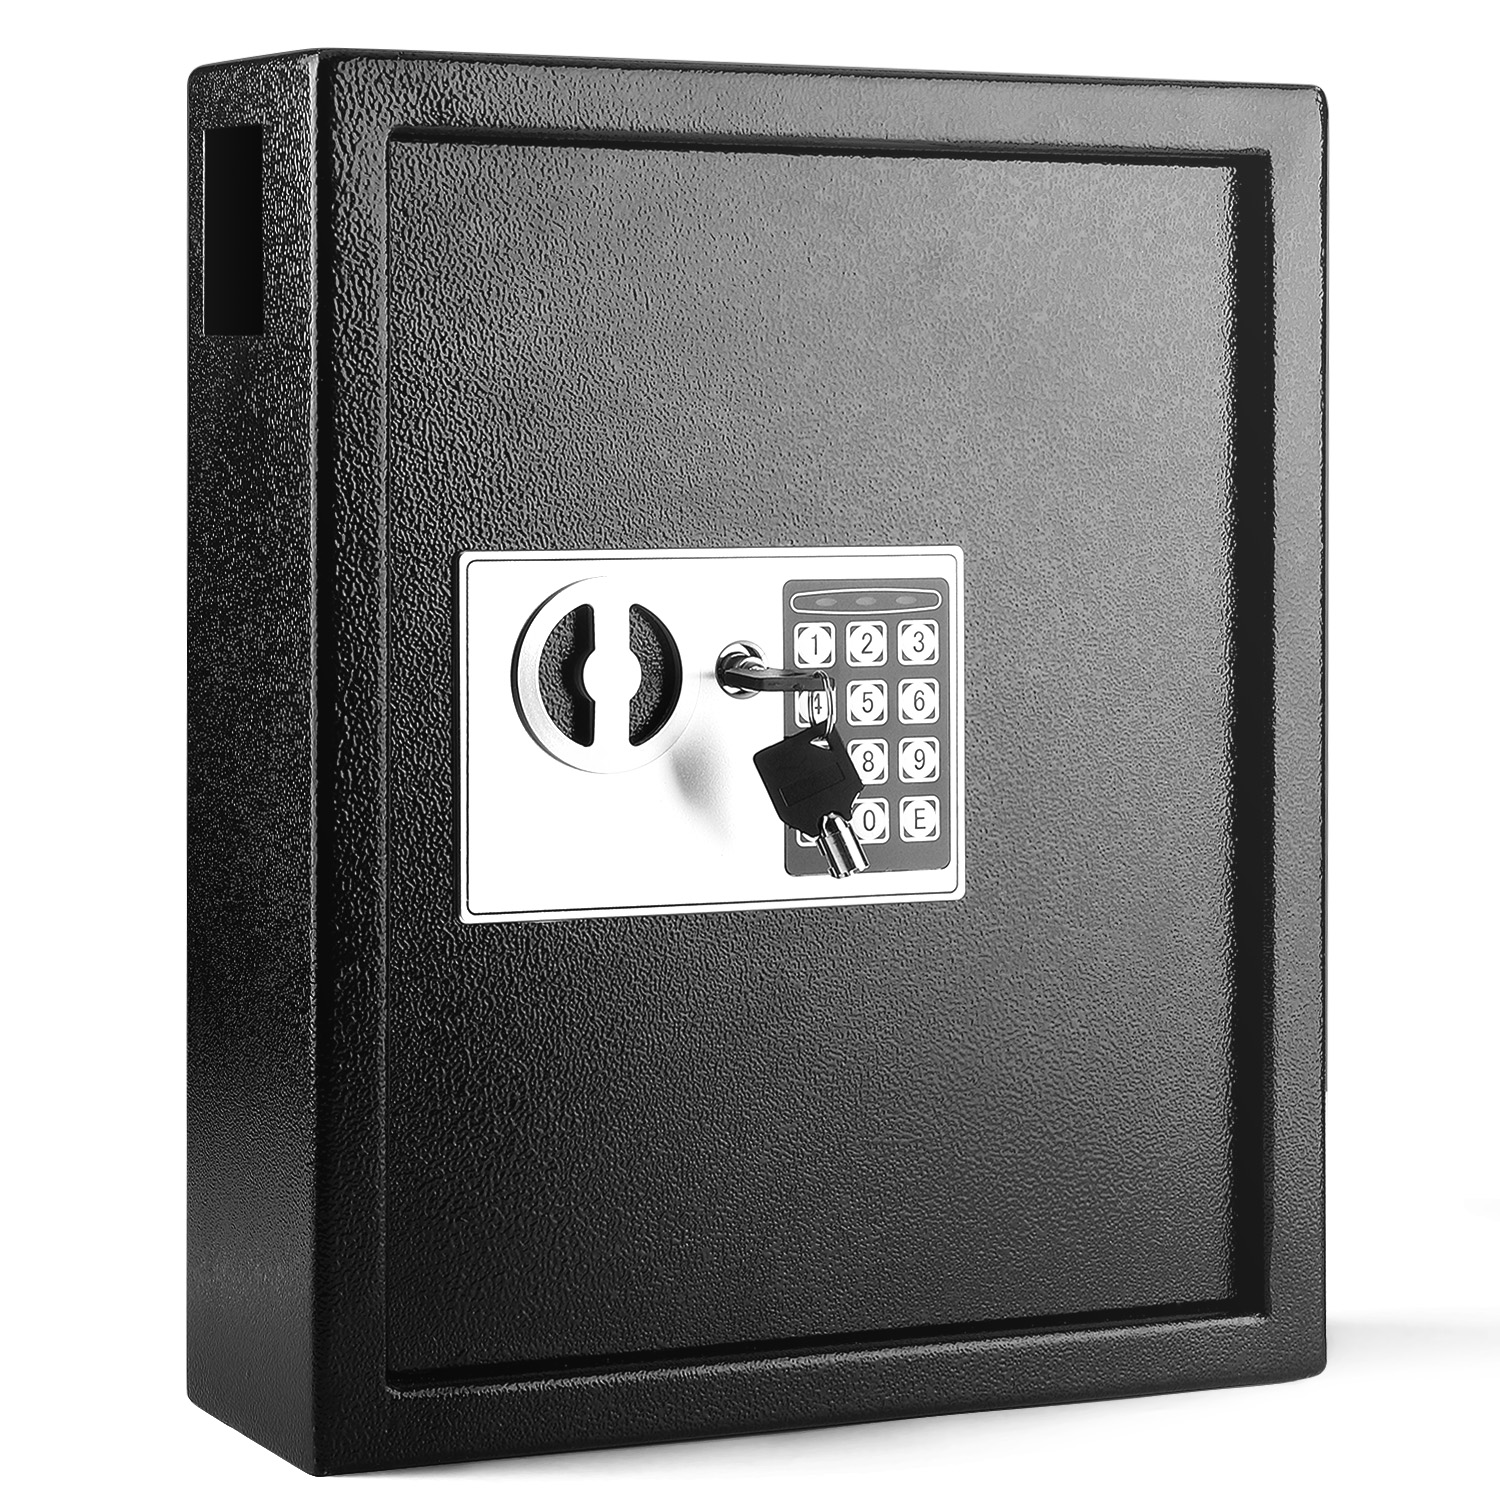 Constructed of 16 gauge steel and scratch-resistant powder coating - Our digital key safe provides long-term durability and protection for your keys. The continuous hinges keep the heavy-duty metal door in line with the cabinet, ensuring a smooth opening